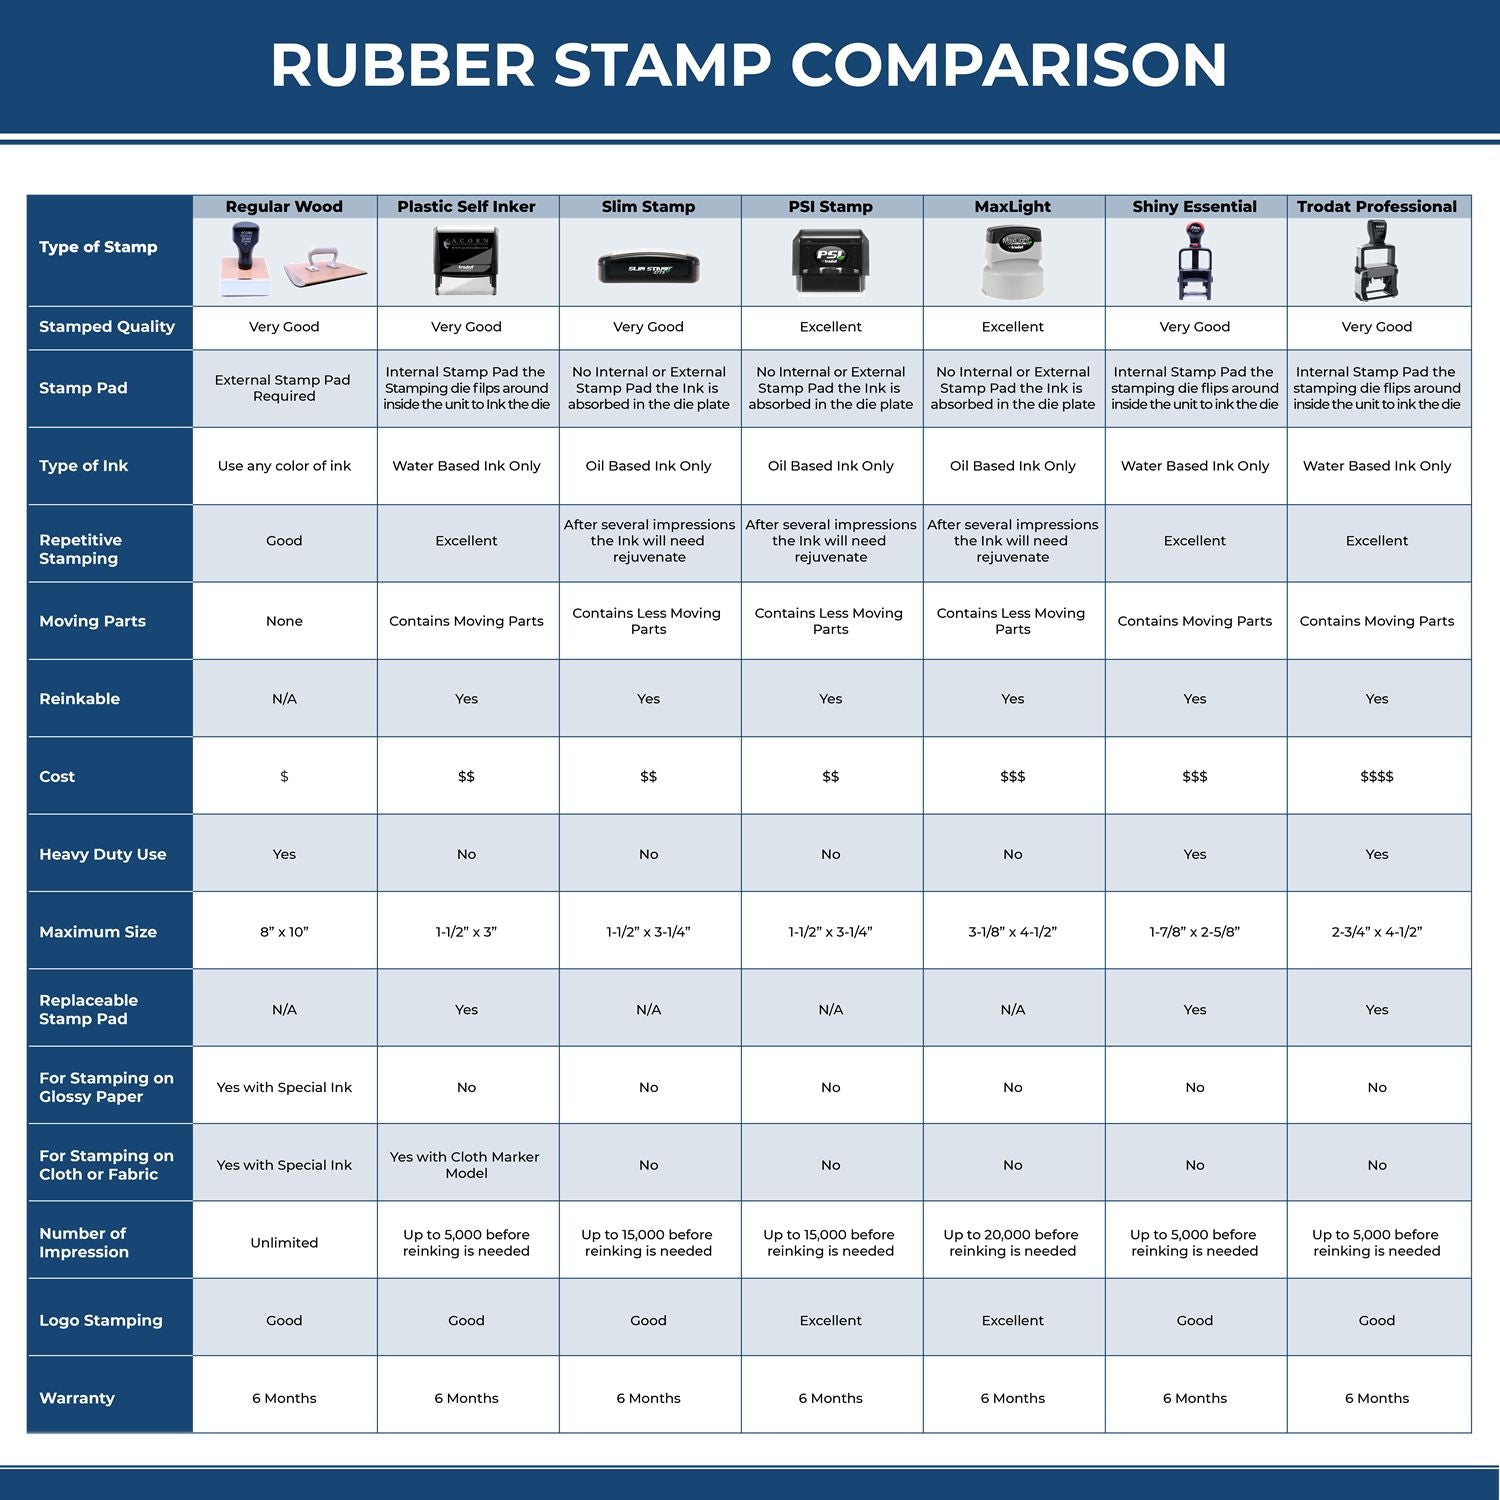 Large Living Will Rubber Stamp 4516R Rubber Stamp Comparison